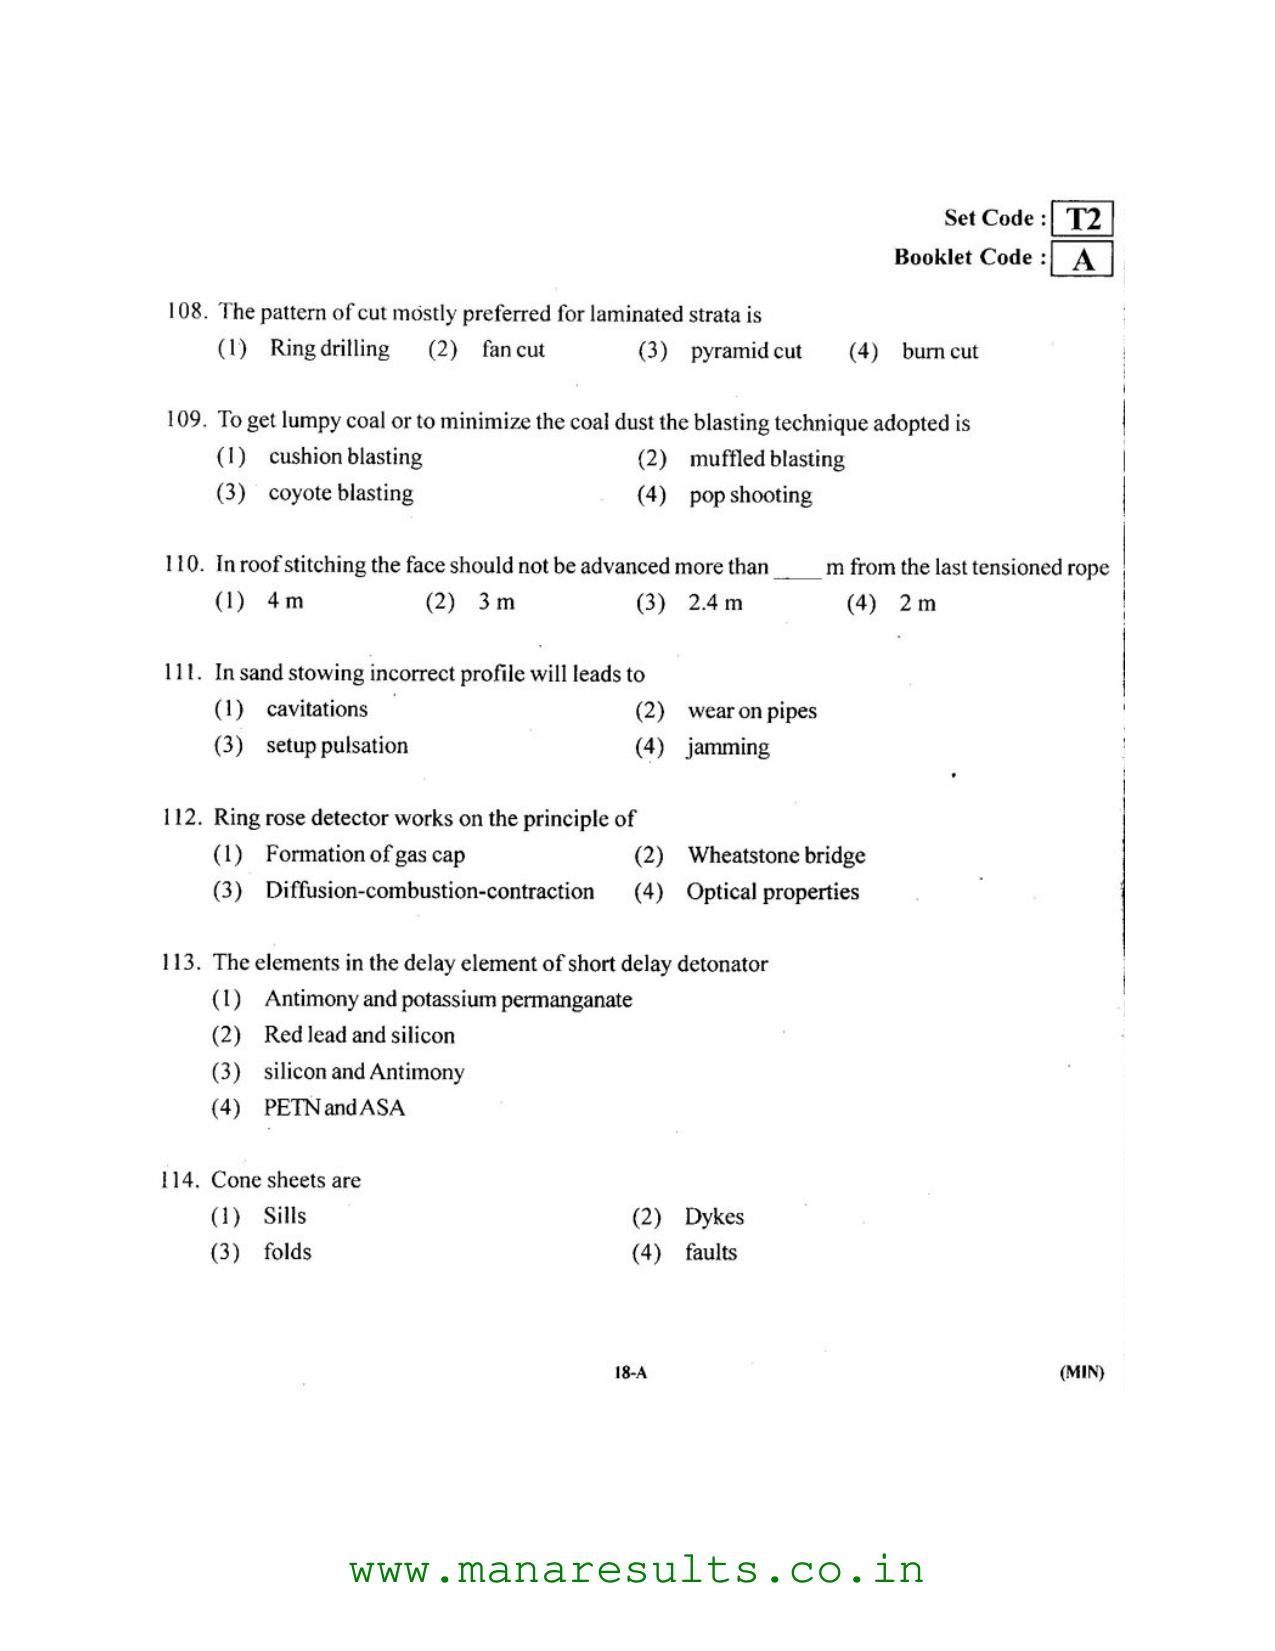 AP ECET 2016 Mining Engineering Old Previous Question Papers - Page 17